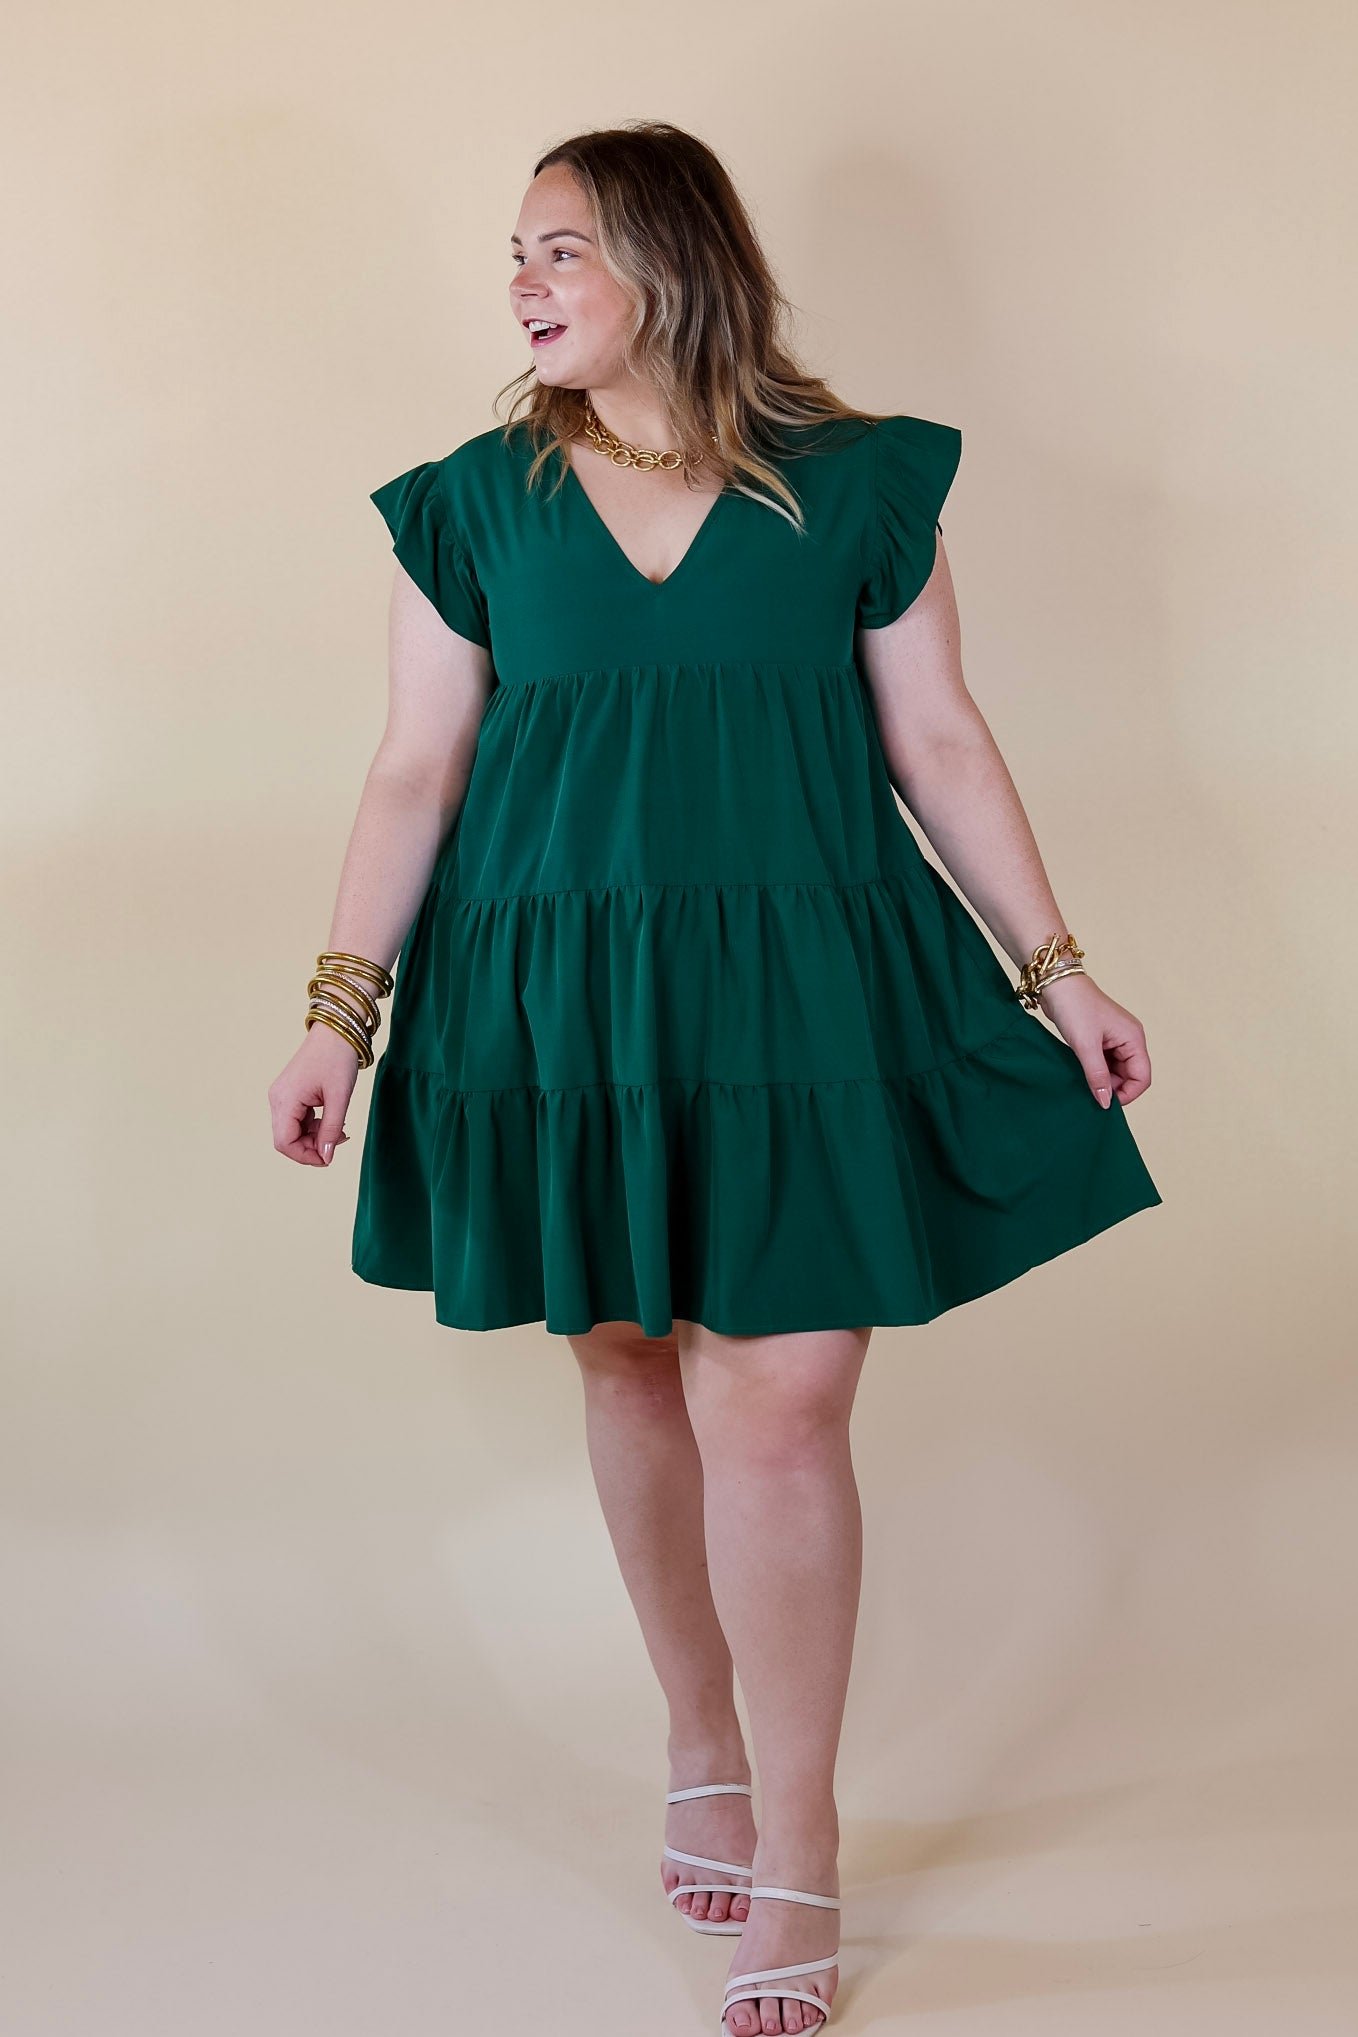 Delightful Endeavor Ruffle Cap Sleeve Tiered Dress in Hunter Green - Giddy Up Glamour Boutique